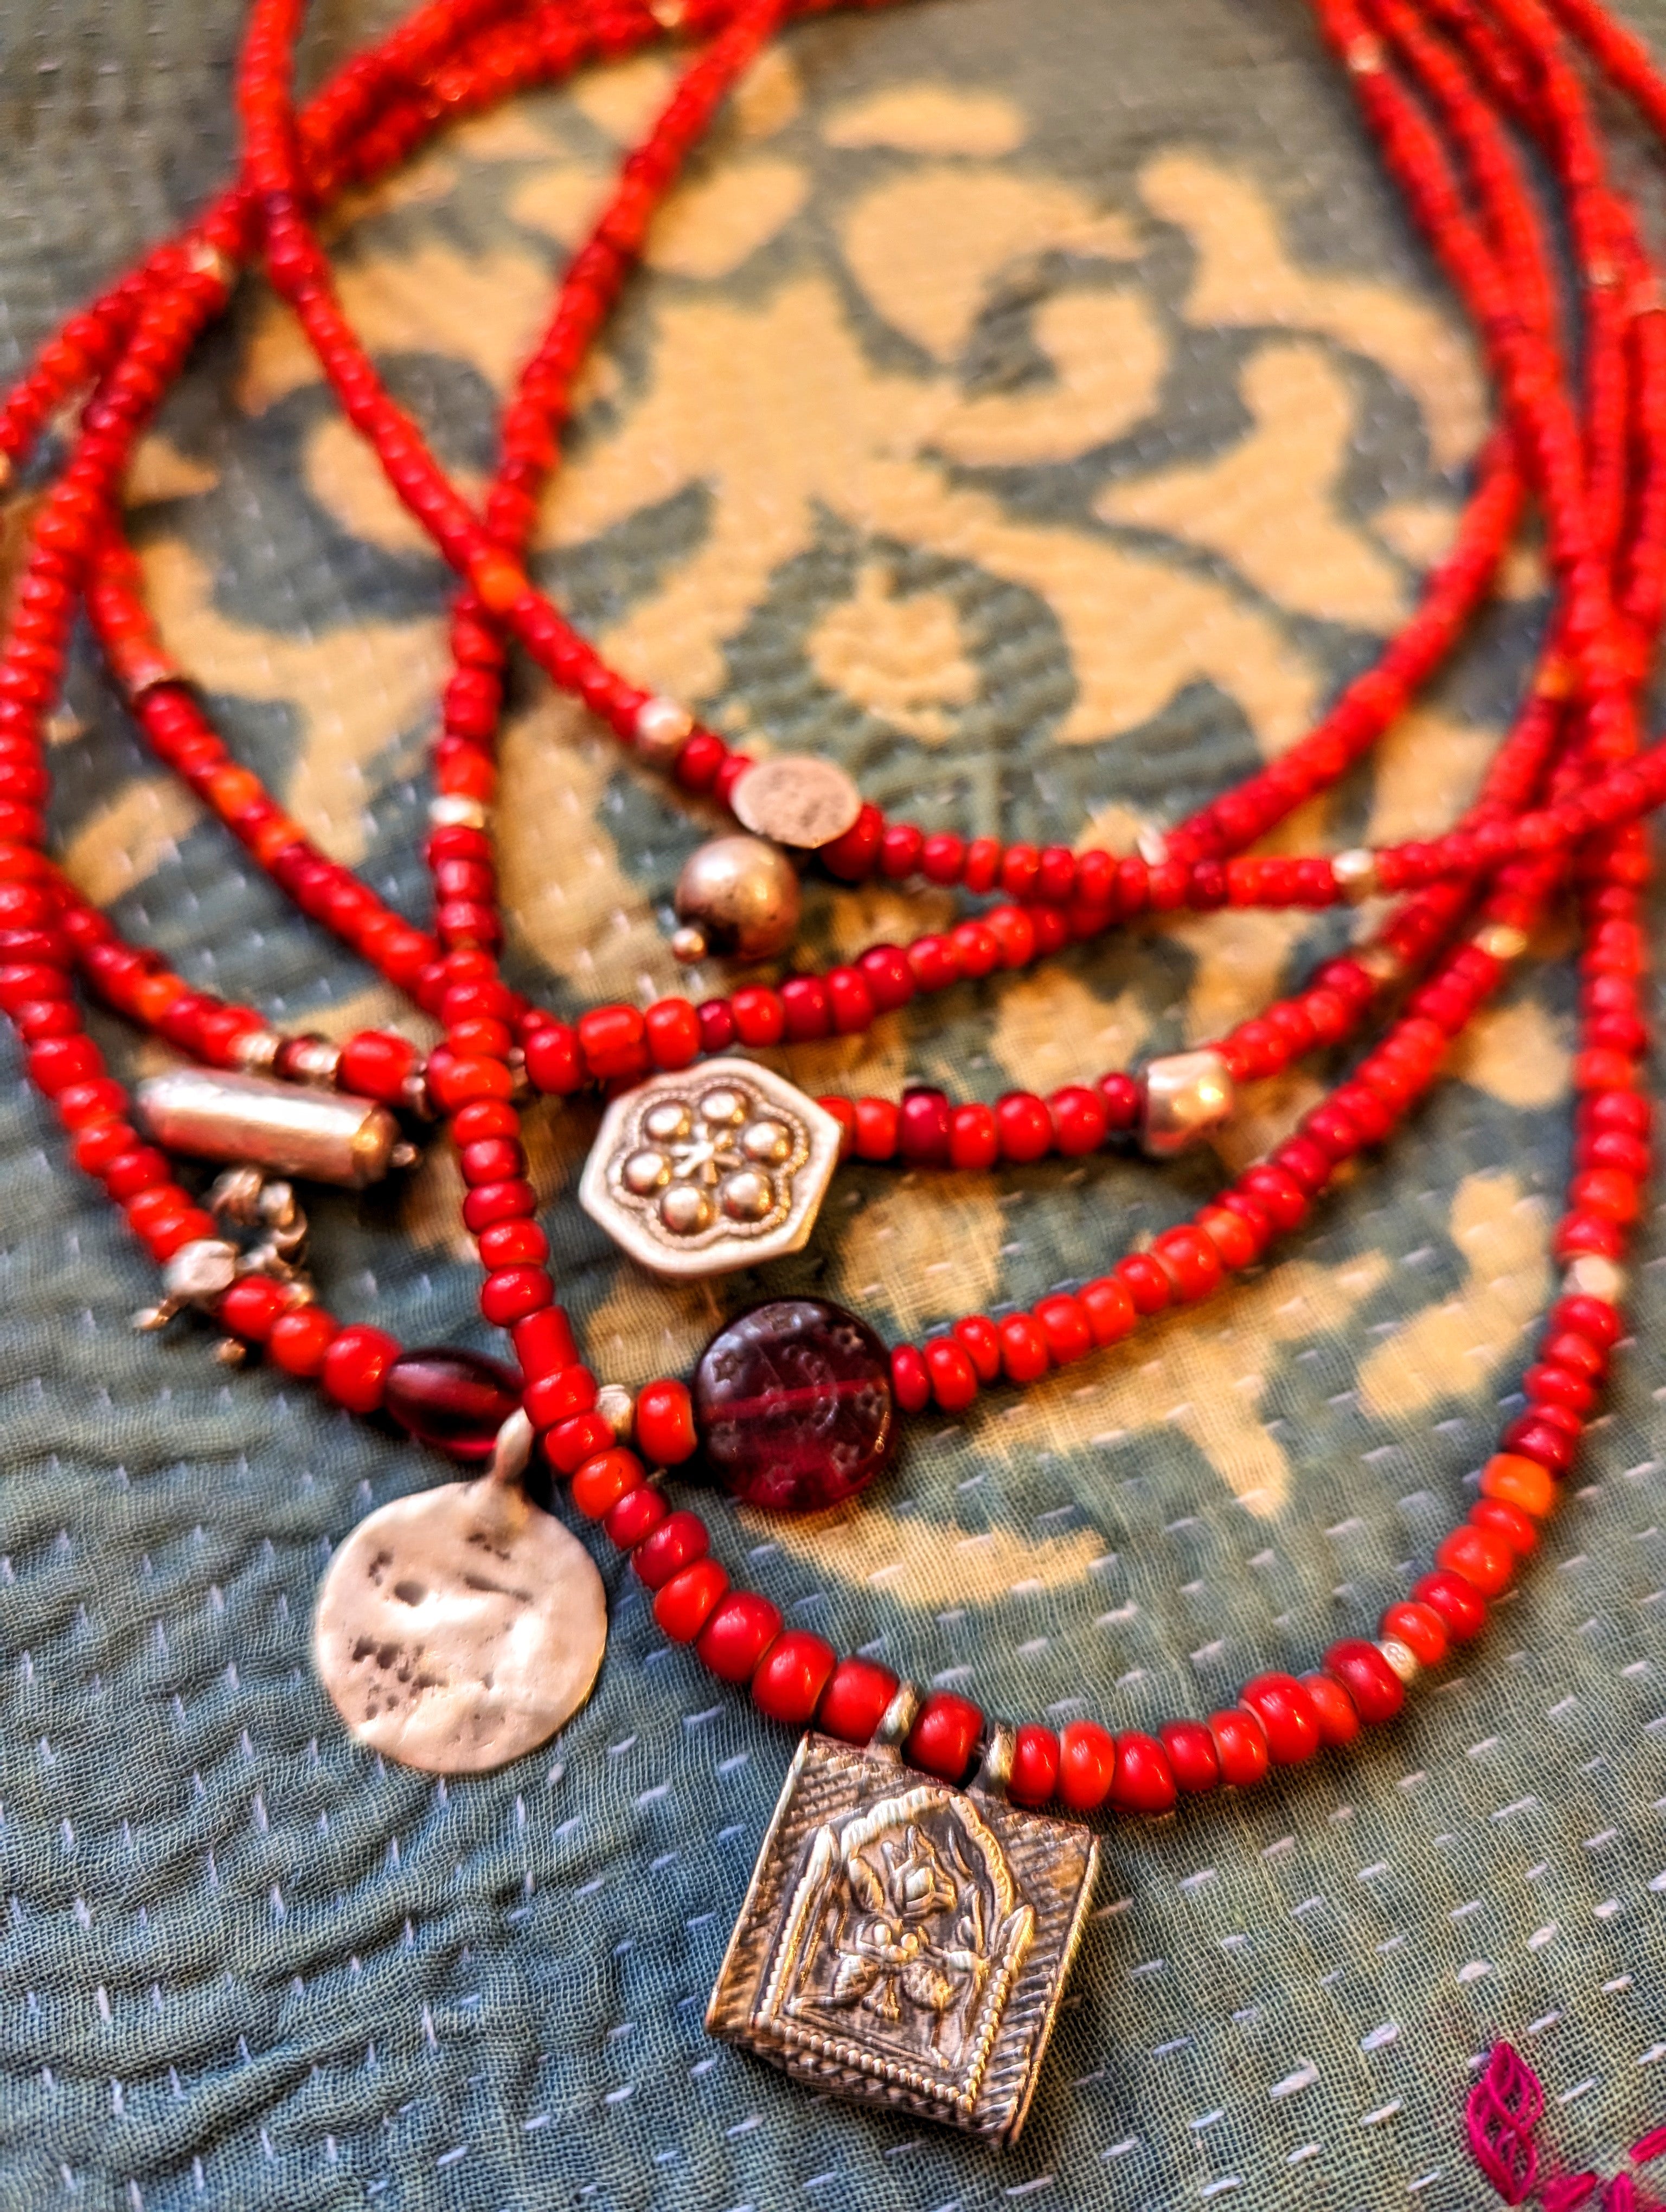 Tribal red trade beads